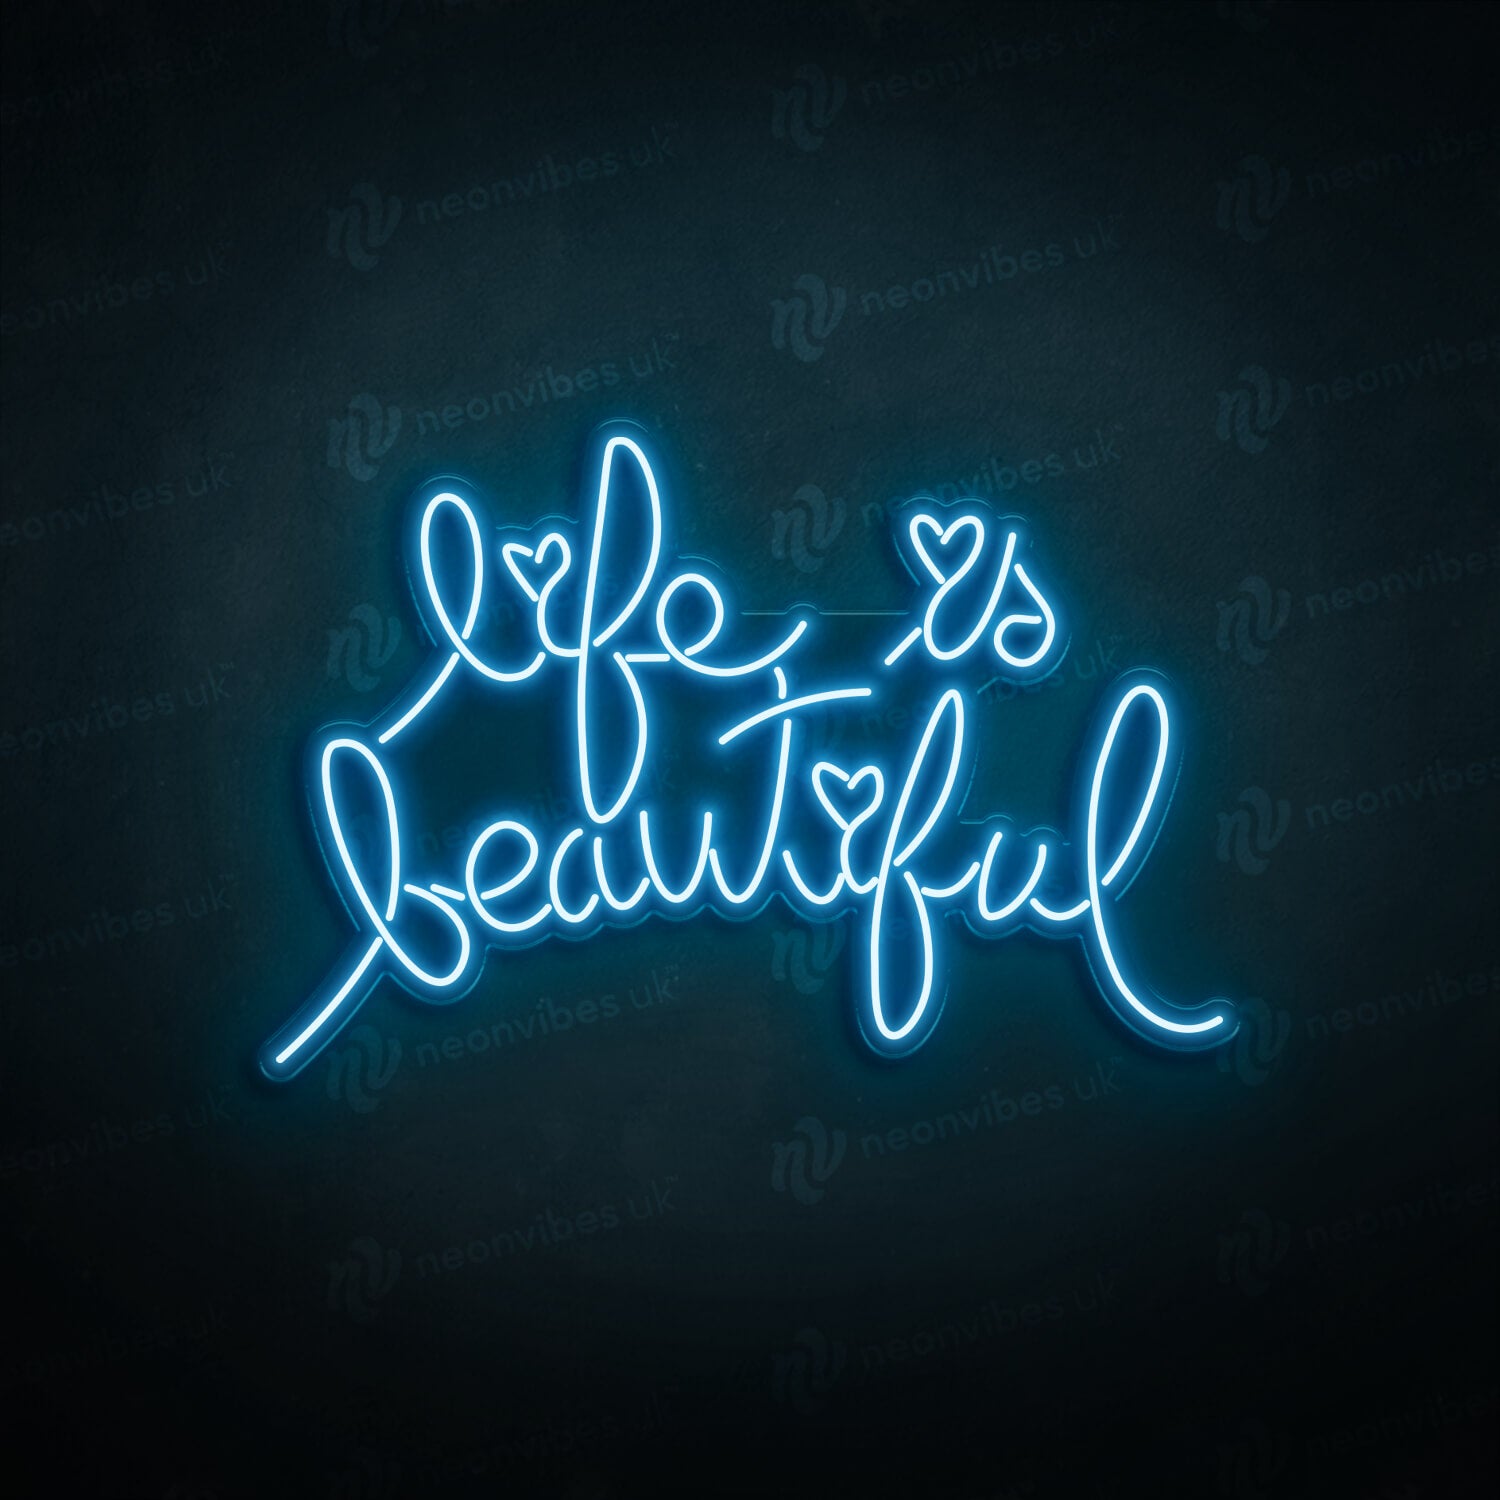 Live Is Beautiful neon sign